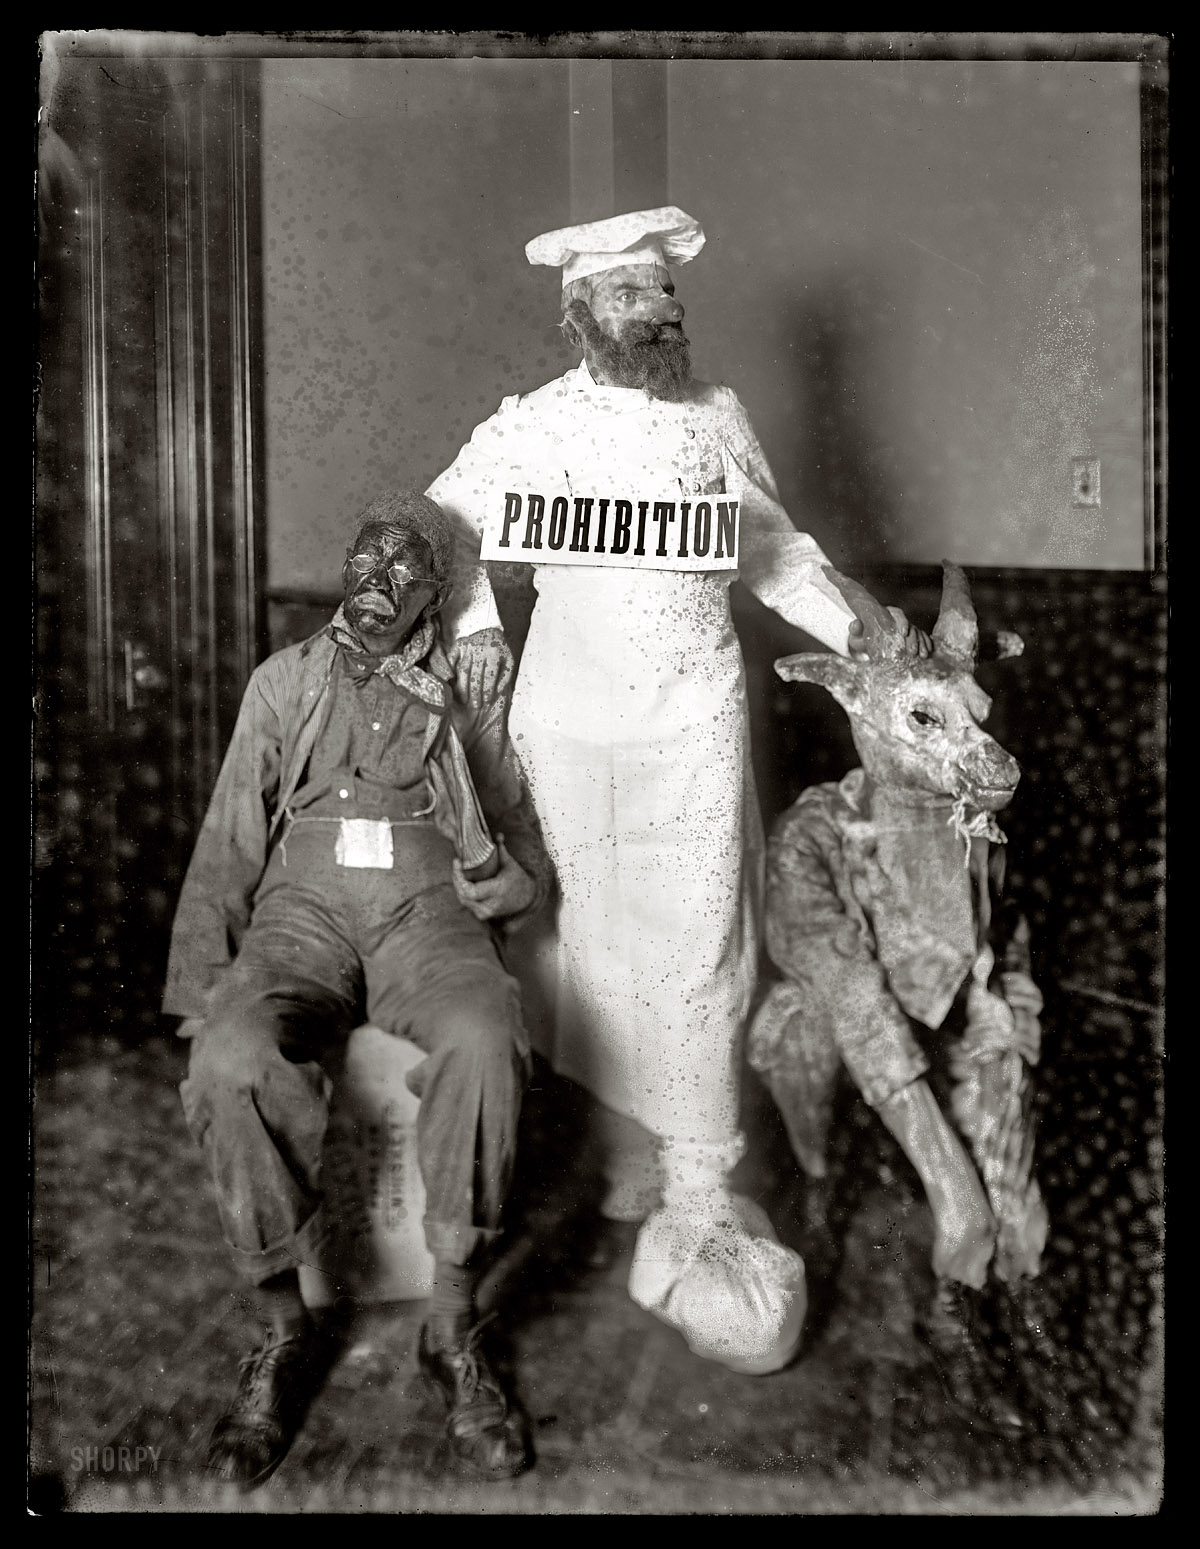 Washington, D.C., circa 1916. There's no caption for this one so we'll have to improvise: "Allegory of Prohibition with cook, goat and ledger-toting old-timer in blackface." National Photo Co. Collection glass negative. View full size.